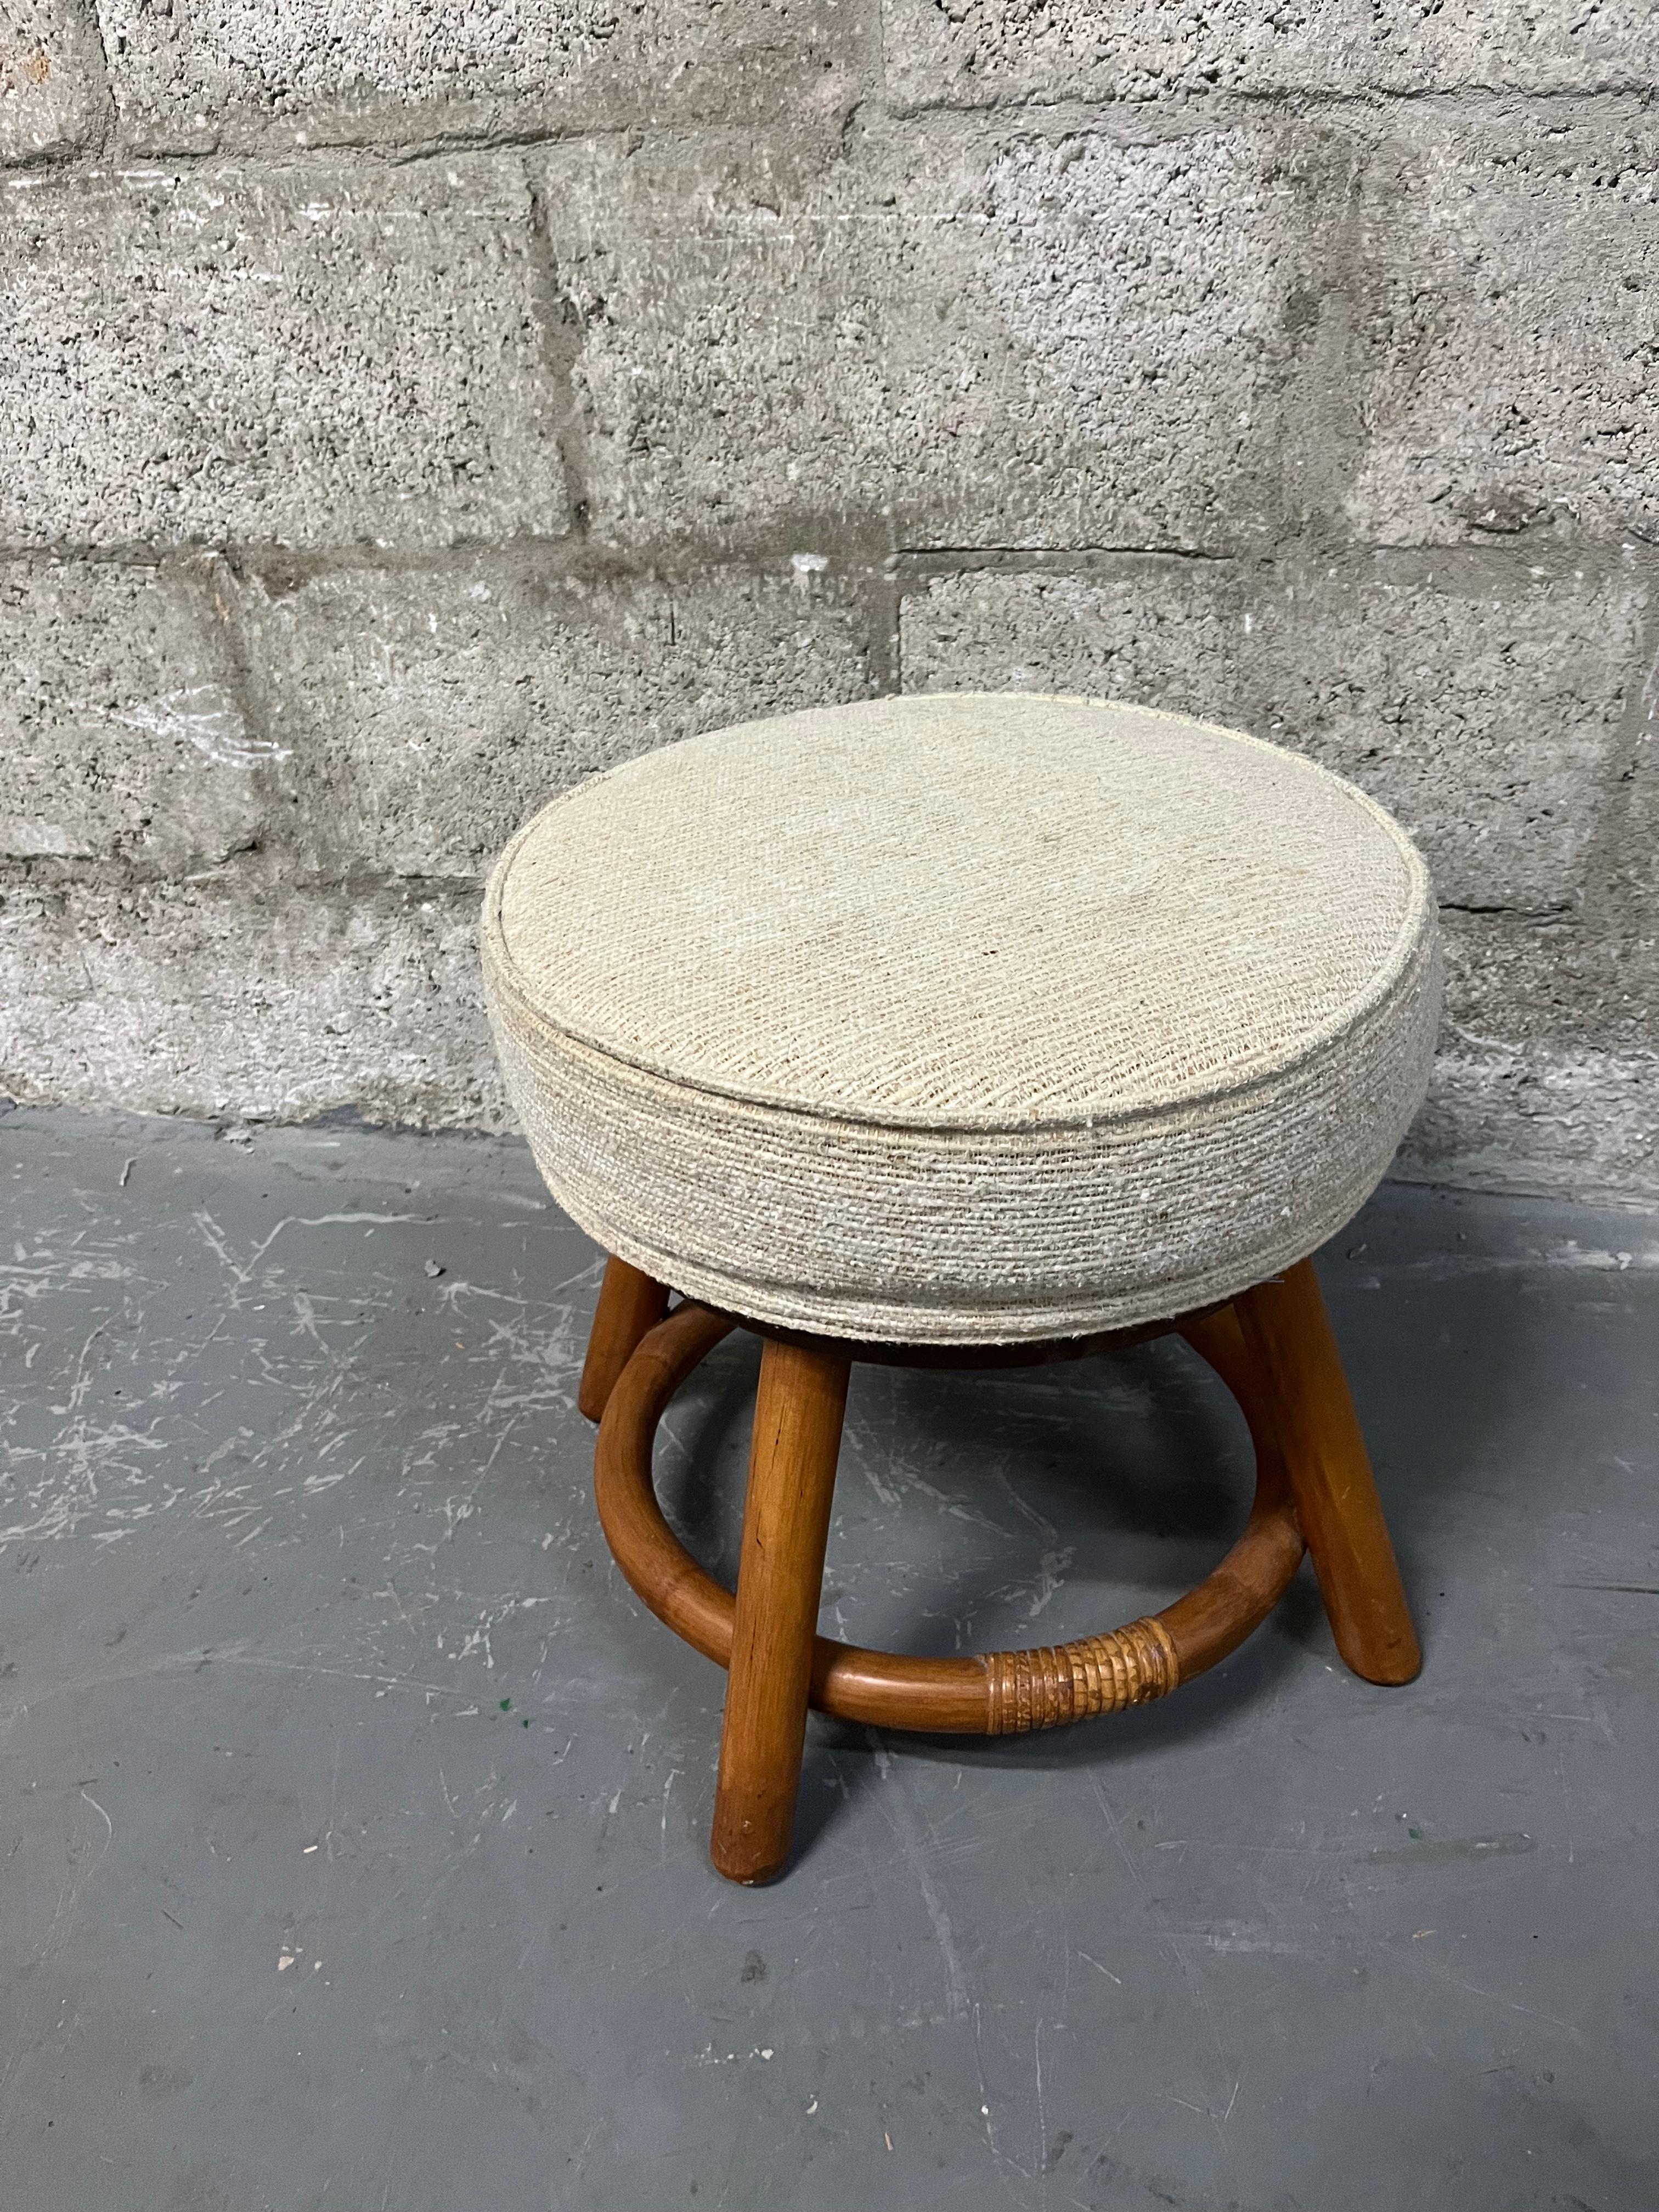 Mid-Century Modern Bamboo Rattan Wicker Swivel Footstool in the Paul Frankl's Style. Circa 1970s  For Sale